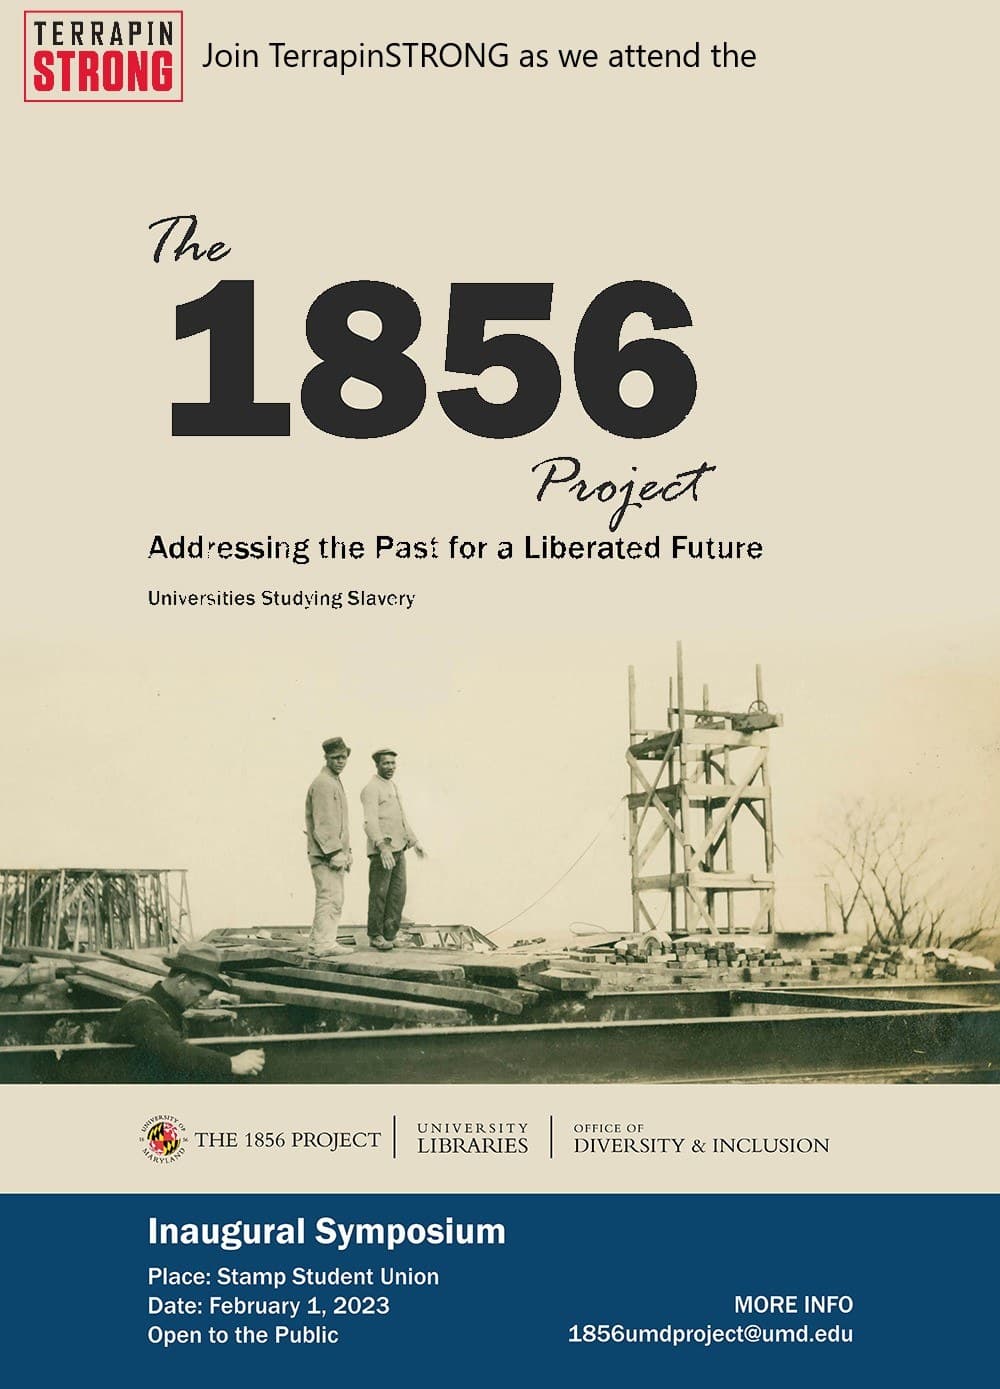 Join TerrapinSTRONG at the Save the Date: The 1856 Project: Addressing the Past for a Liberated Future; Universities Studying Slavery. A collaboration of the 1856 Project, University Libraries, and the Office of Diversity & Inclusion. Inaugural Symposium. Place: Stamp Student Union; Date: February 1, 2023; Open to the public. More info 1856umdproject@umd.edu